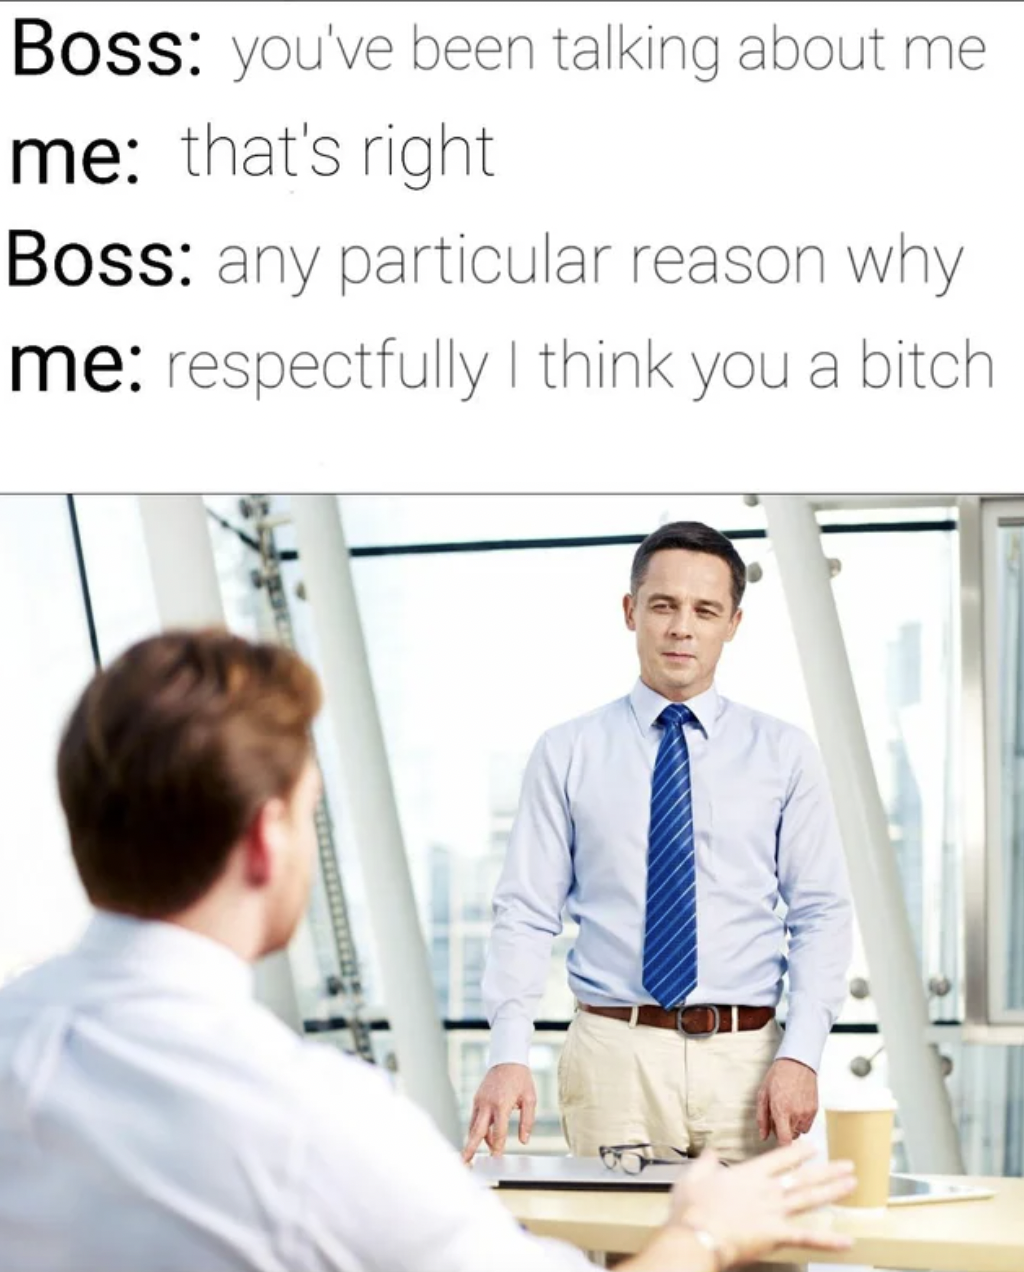 Work memes - Boss you've been talking about me me that's right Boss any particular reason why me respectfully I think you a bitch